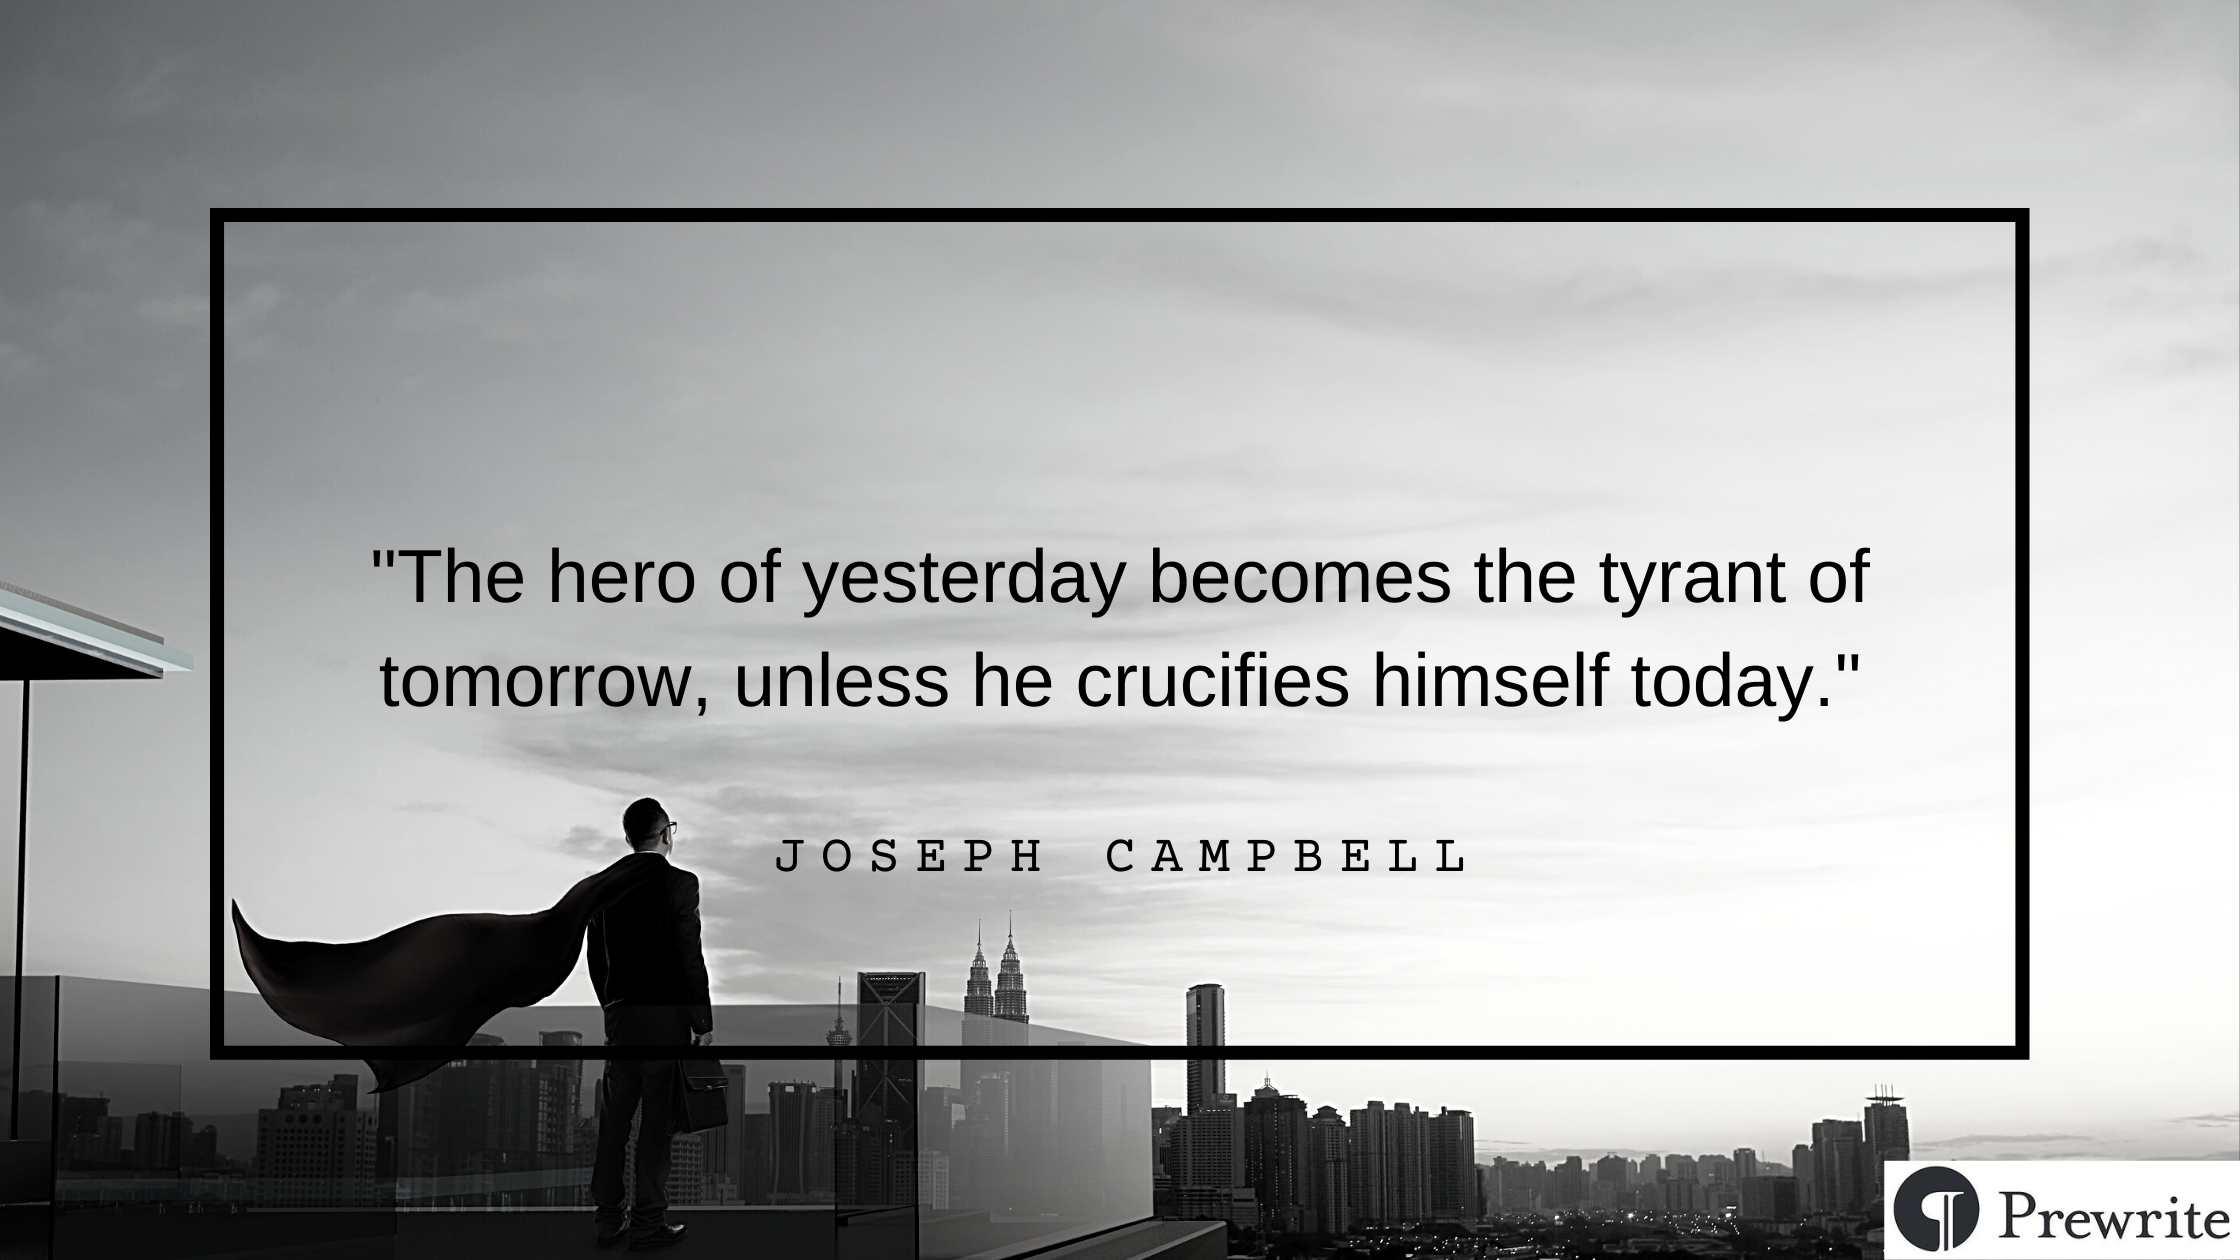 Joseph Campbell quote: The hero of yesterday becomes the tyrant of tomorrow, unless he crucifies himself today.